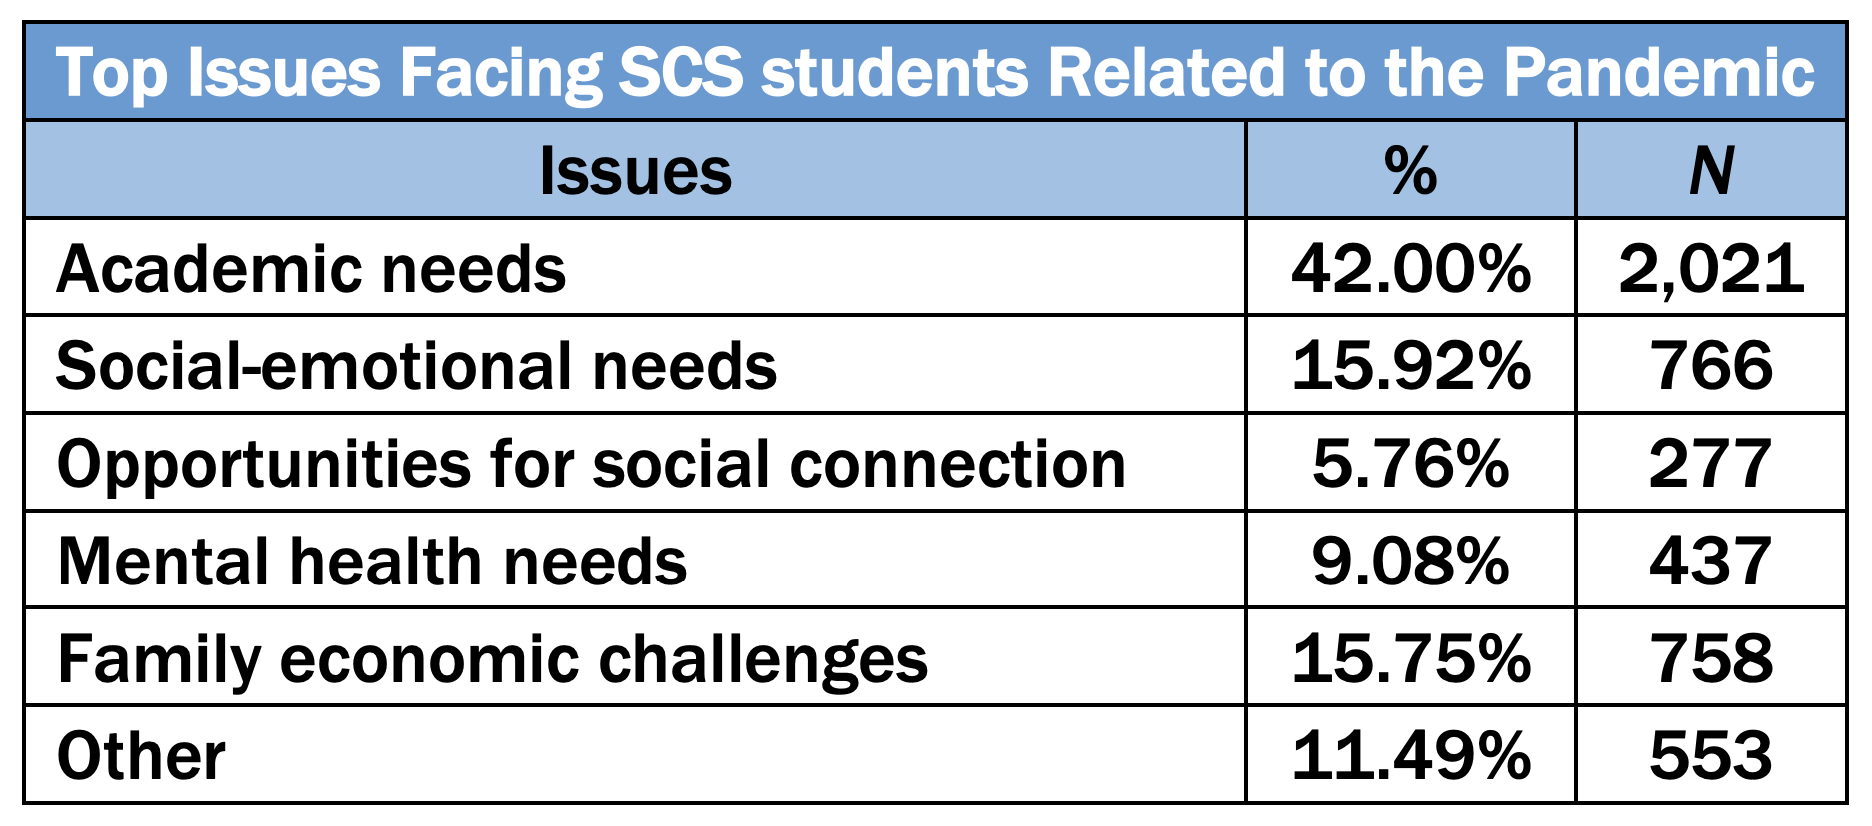 Top Issues Facing SCS students Related to the Pandemic